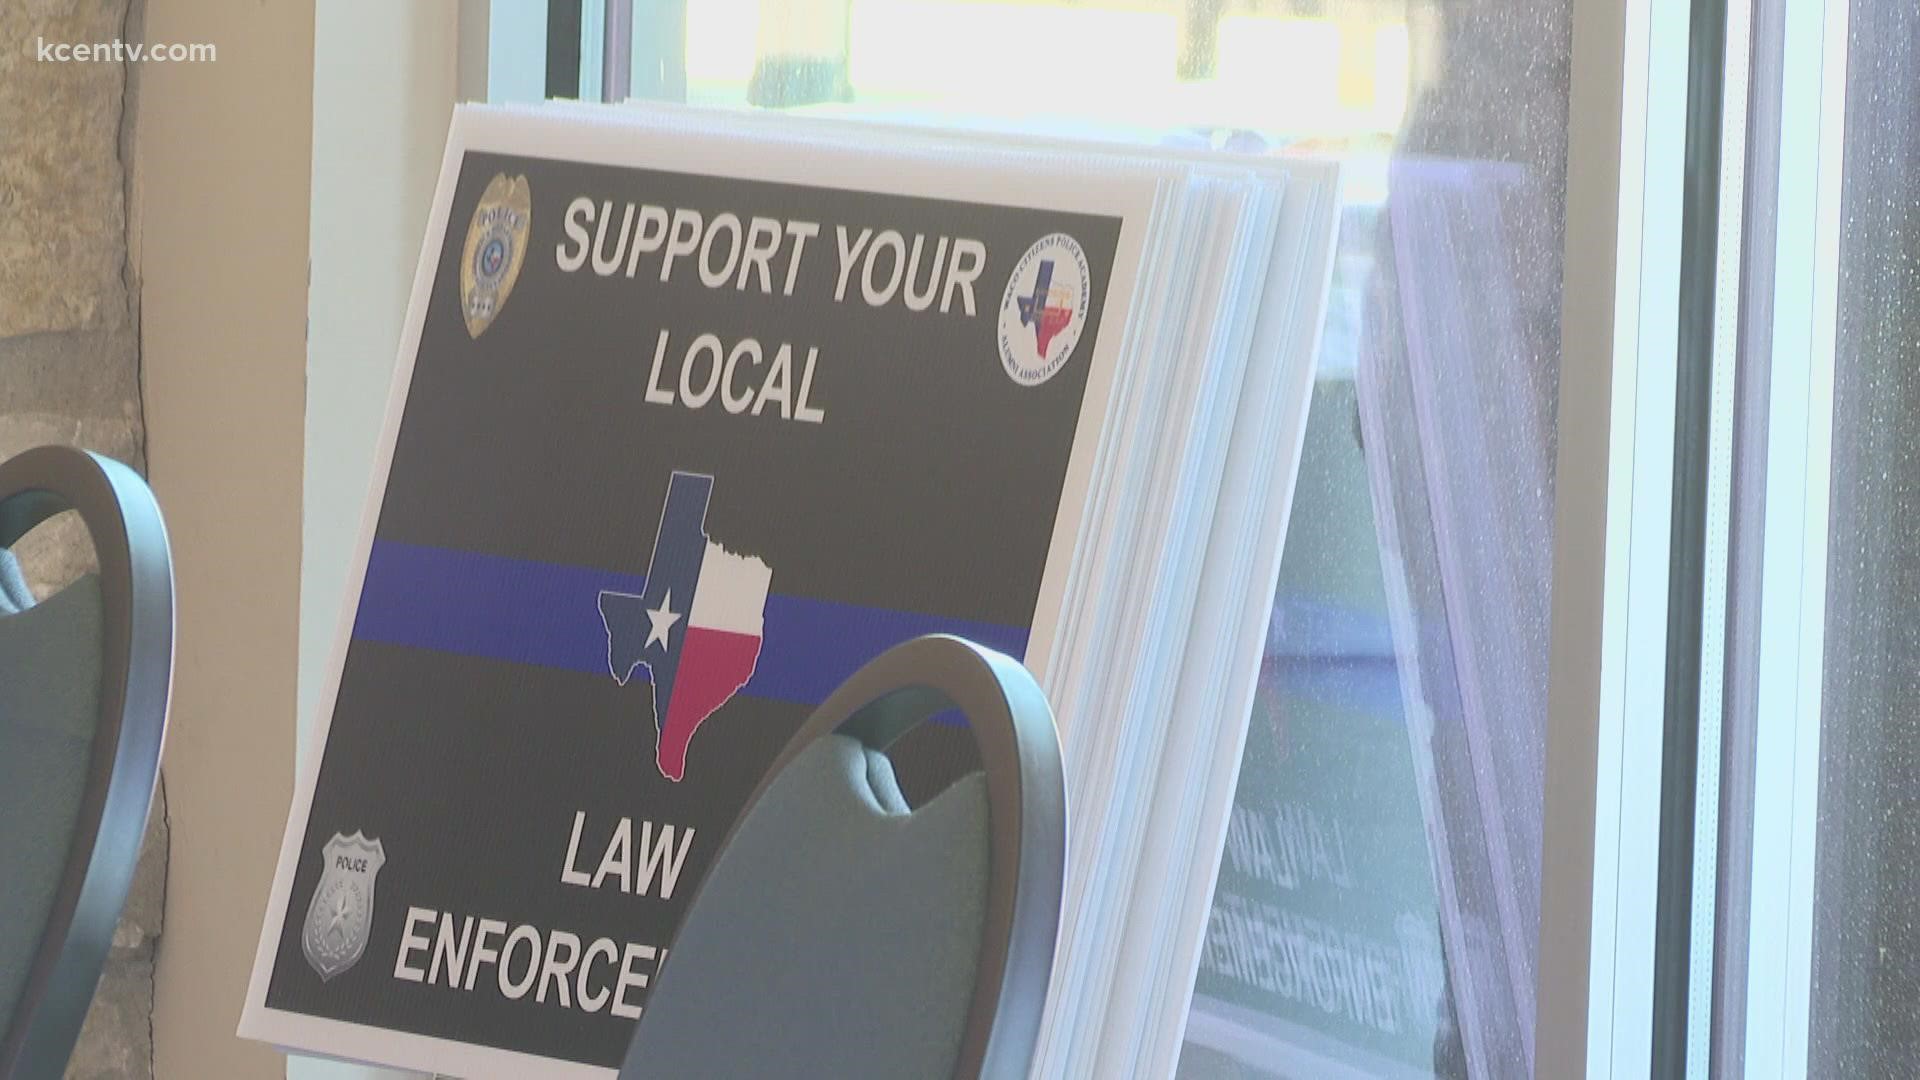 It was the first annual summit that set out to educate the public on how to protect themselves through prevention.